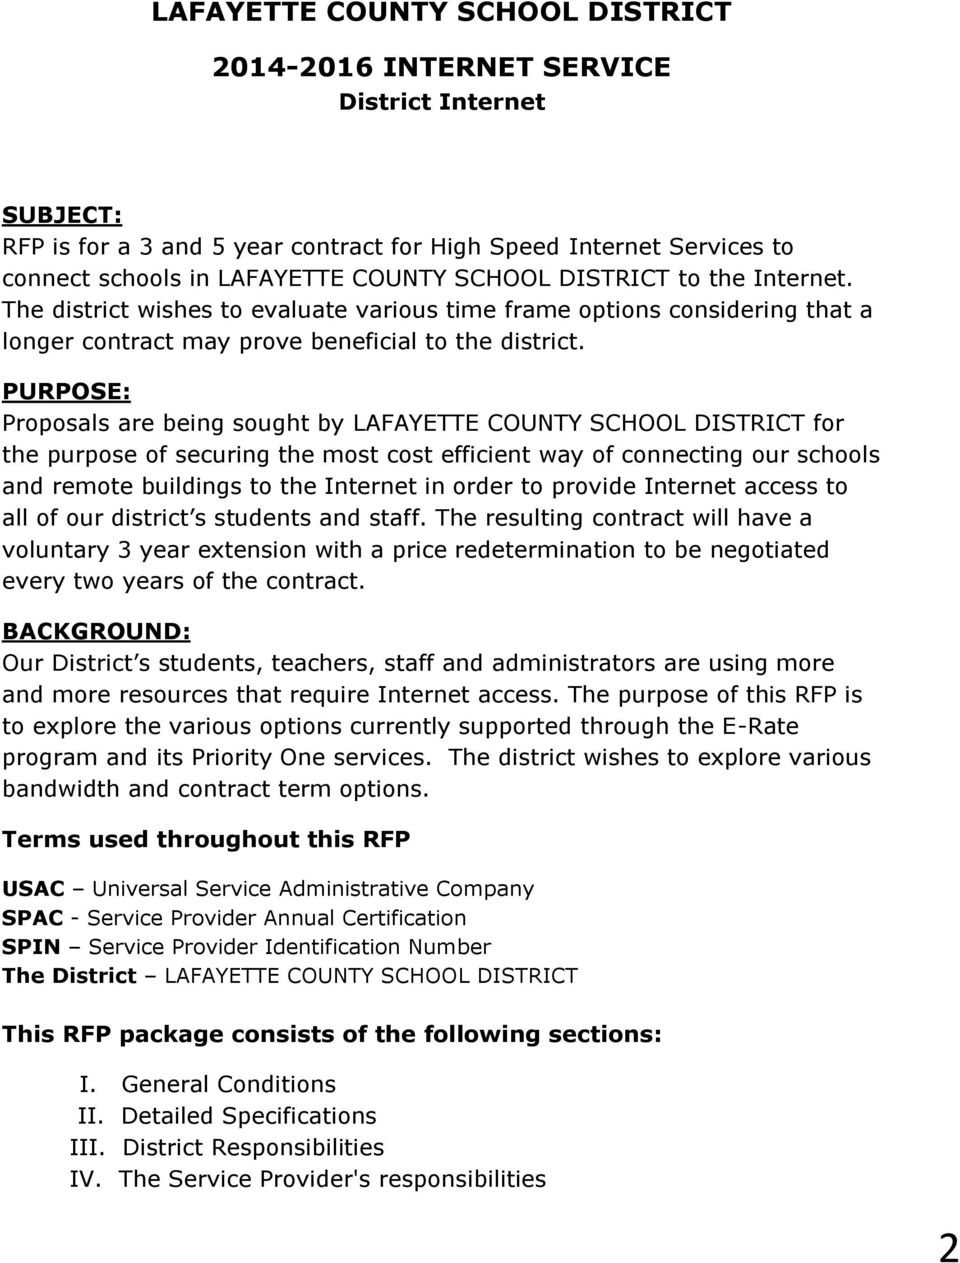 PURPOSE: Proposals are being sought by LAFAYETTE COUNTY SCHOOL DISTRICT for the purpose of securing the most cost efficient way of connecting our schools and remote buildings to the Internet in order